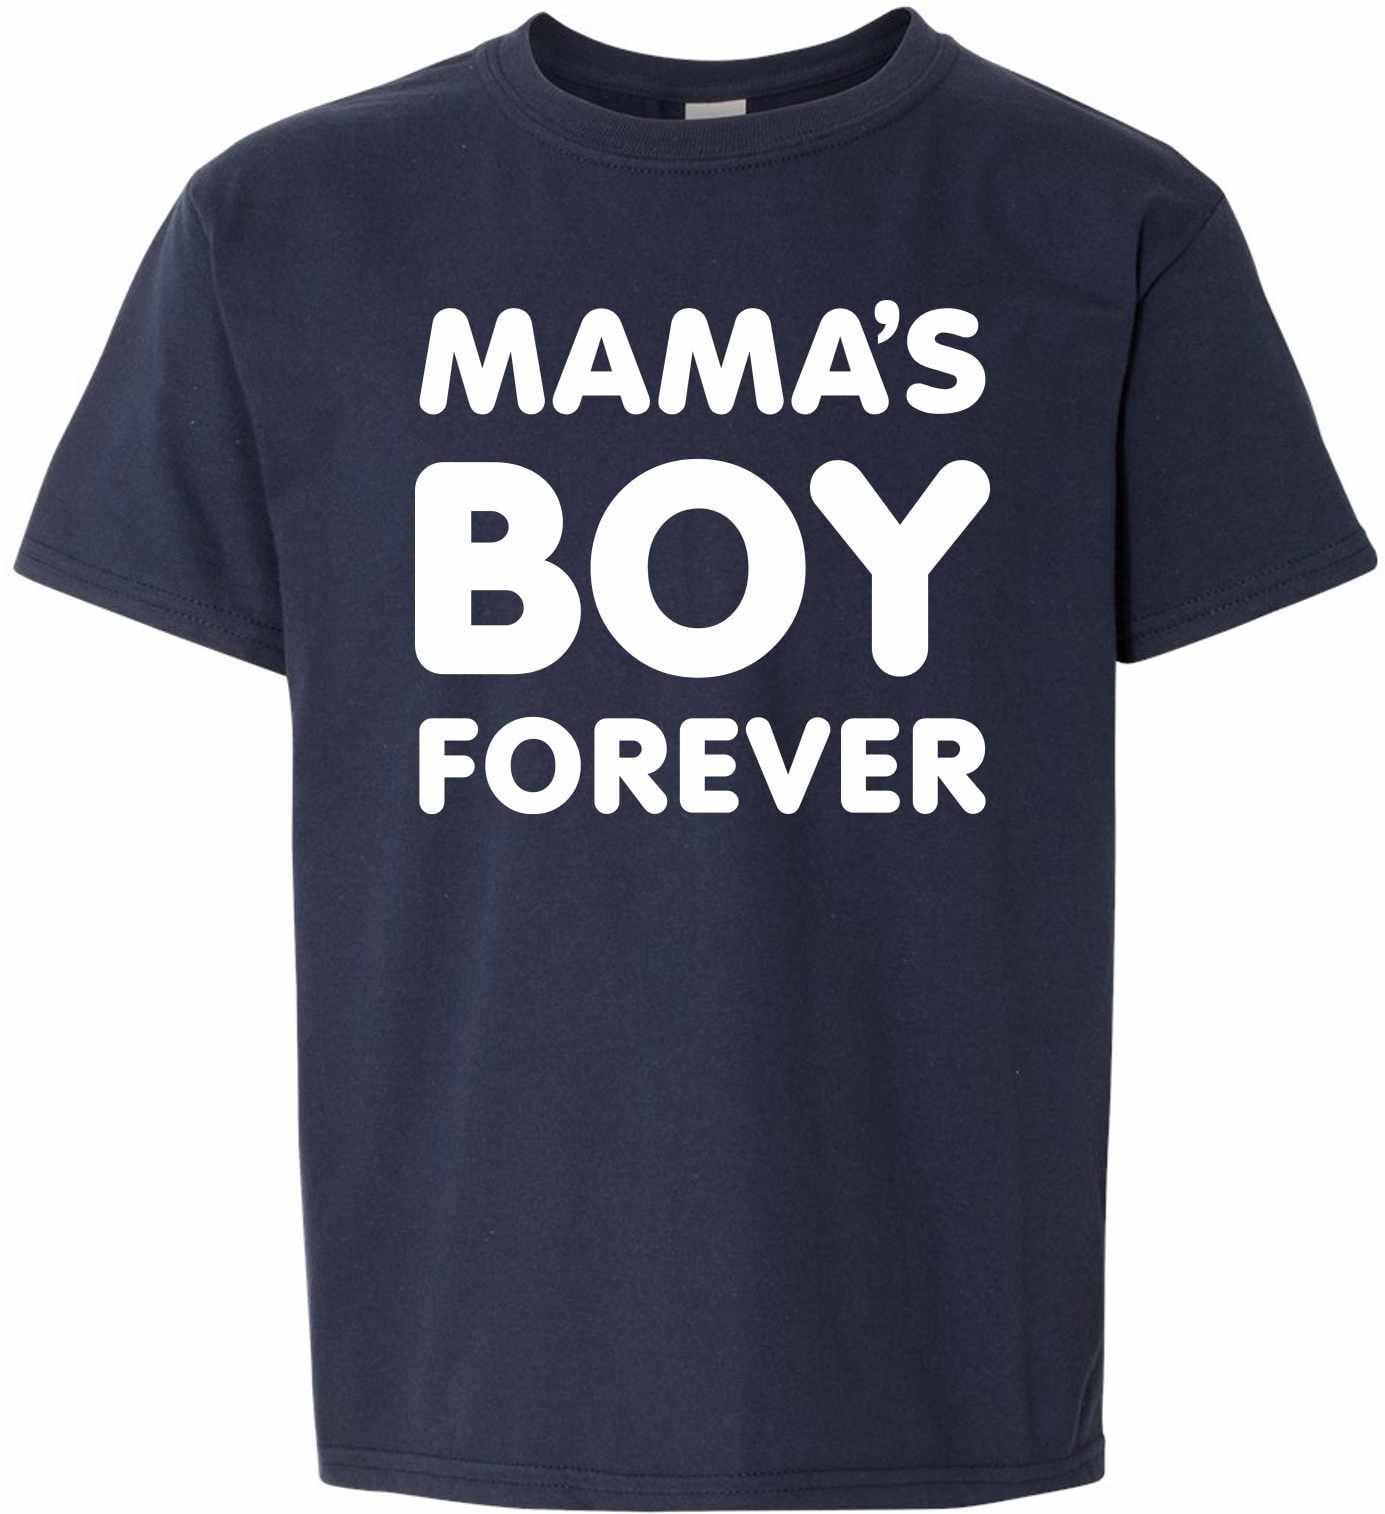 Mama's Boy Forever on Kids T-Shirt (#1223-201)